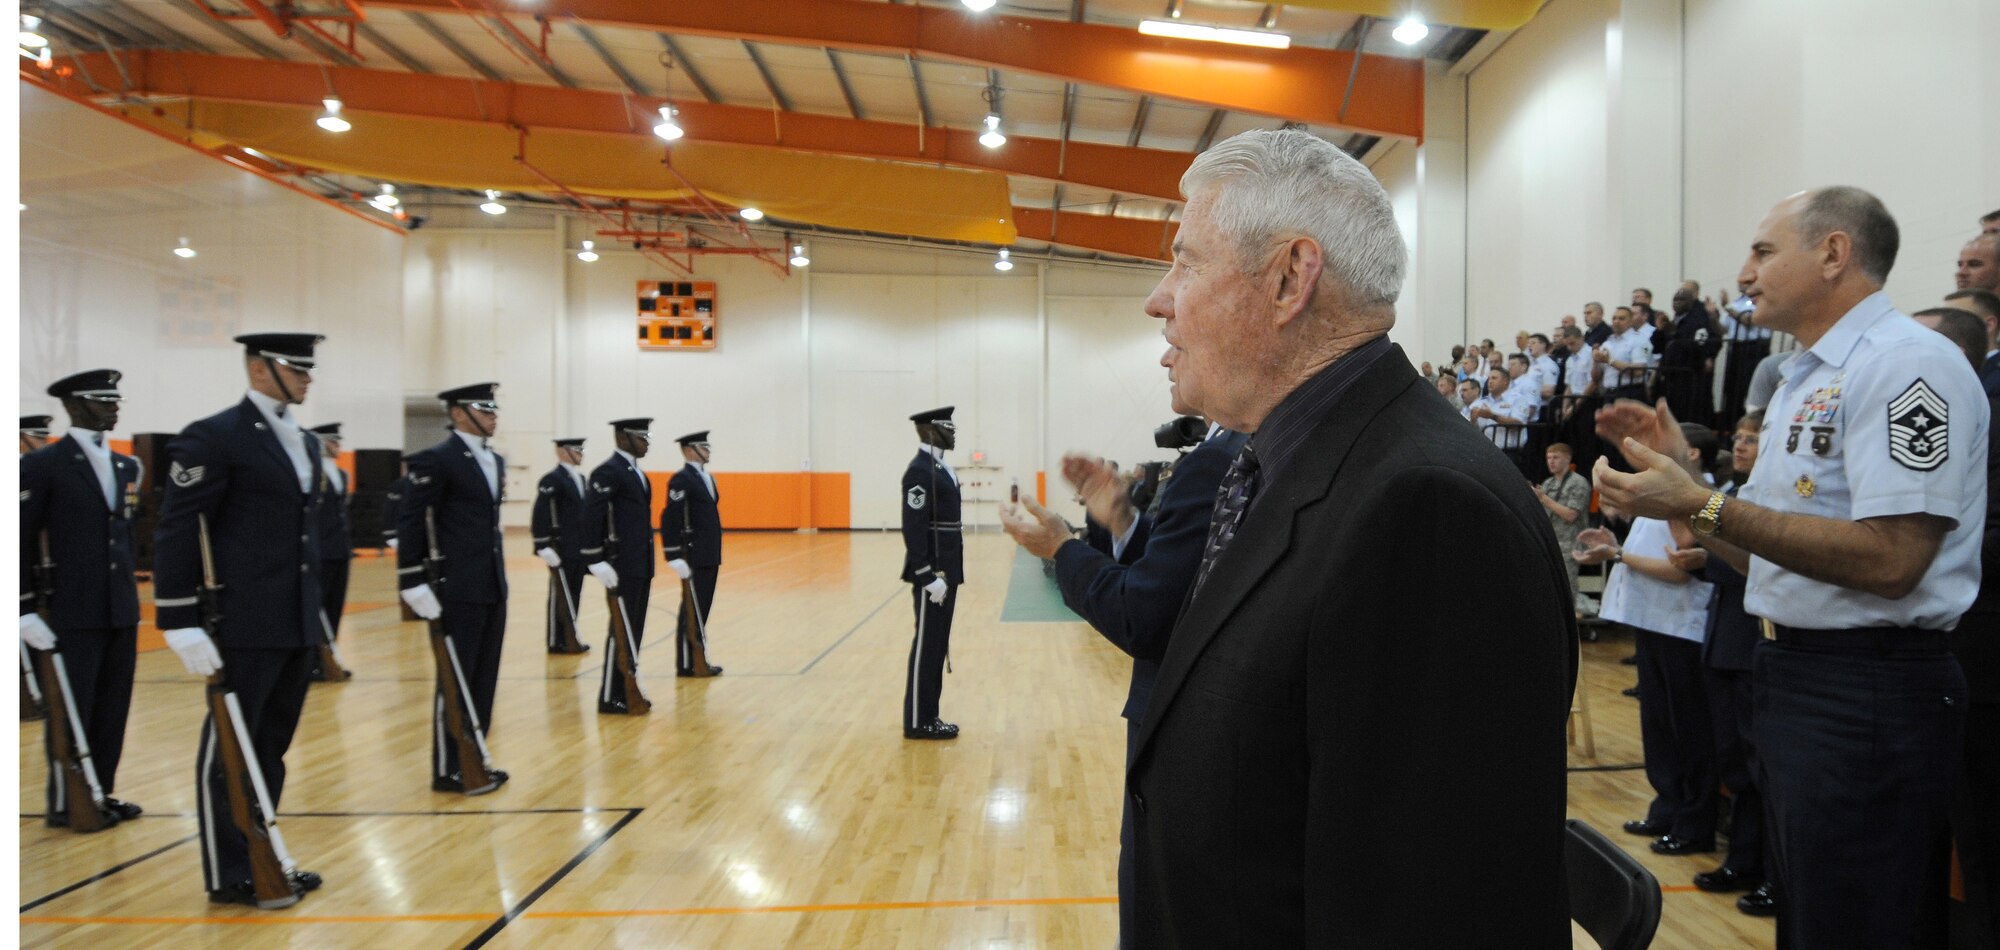 Fifth Chief Master Sergeant of the U.S Air Force Robert Gaylor watches The U.S Air Force Honor Guard Drill Team performs along withThe U.S Air Force Band's rock band "Max Imapact" after his opening speech 20th April Boo Sportsplex Hampton, Va. In retired Chief Gaylor’s speech he commented on The Band of Sisters, his time during WWII, the Vietnam war, and where our Airman are now during Air Force weeks Honoring America’s Veterans Ceremony. (U.S. Air Force photo by Senior Airman Alexandre Montes)